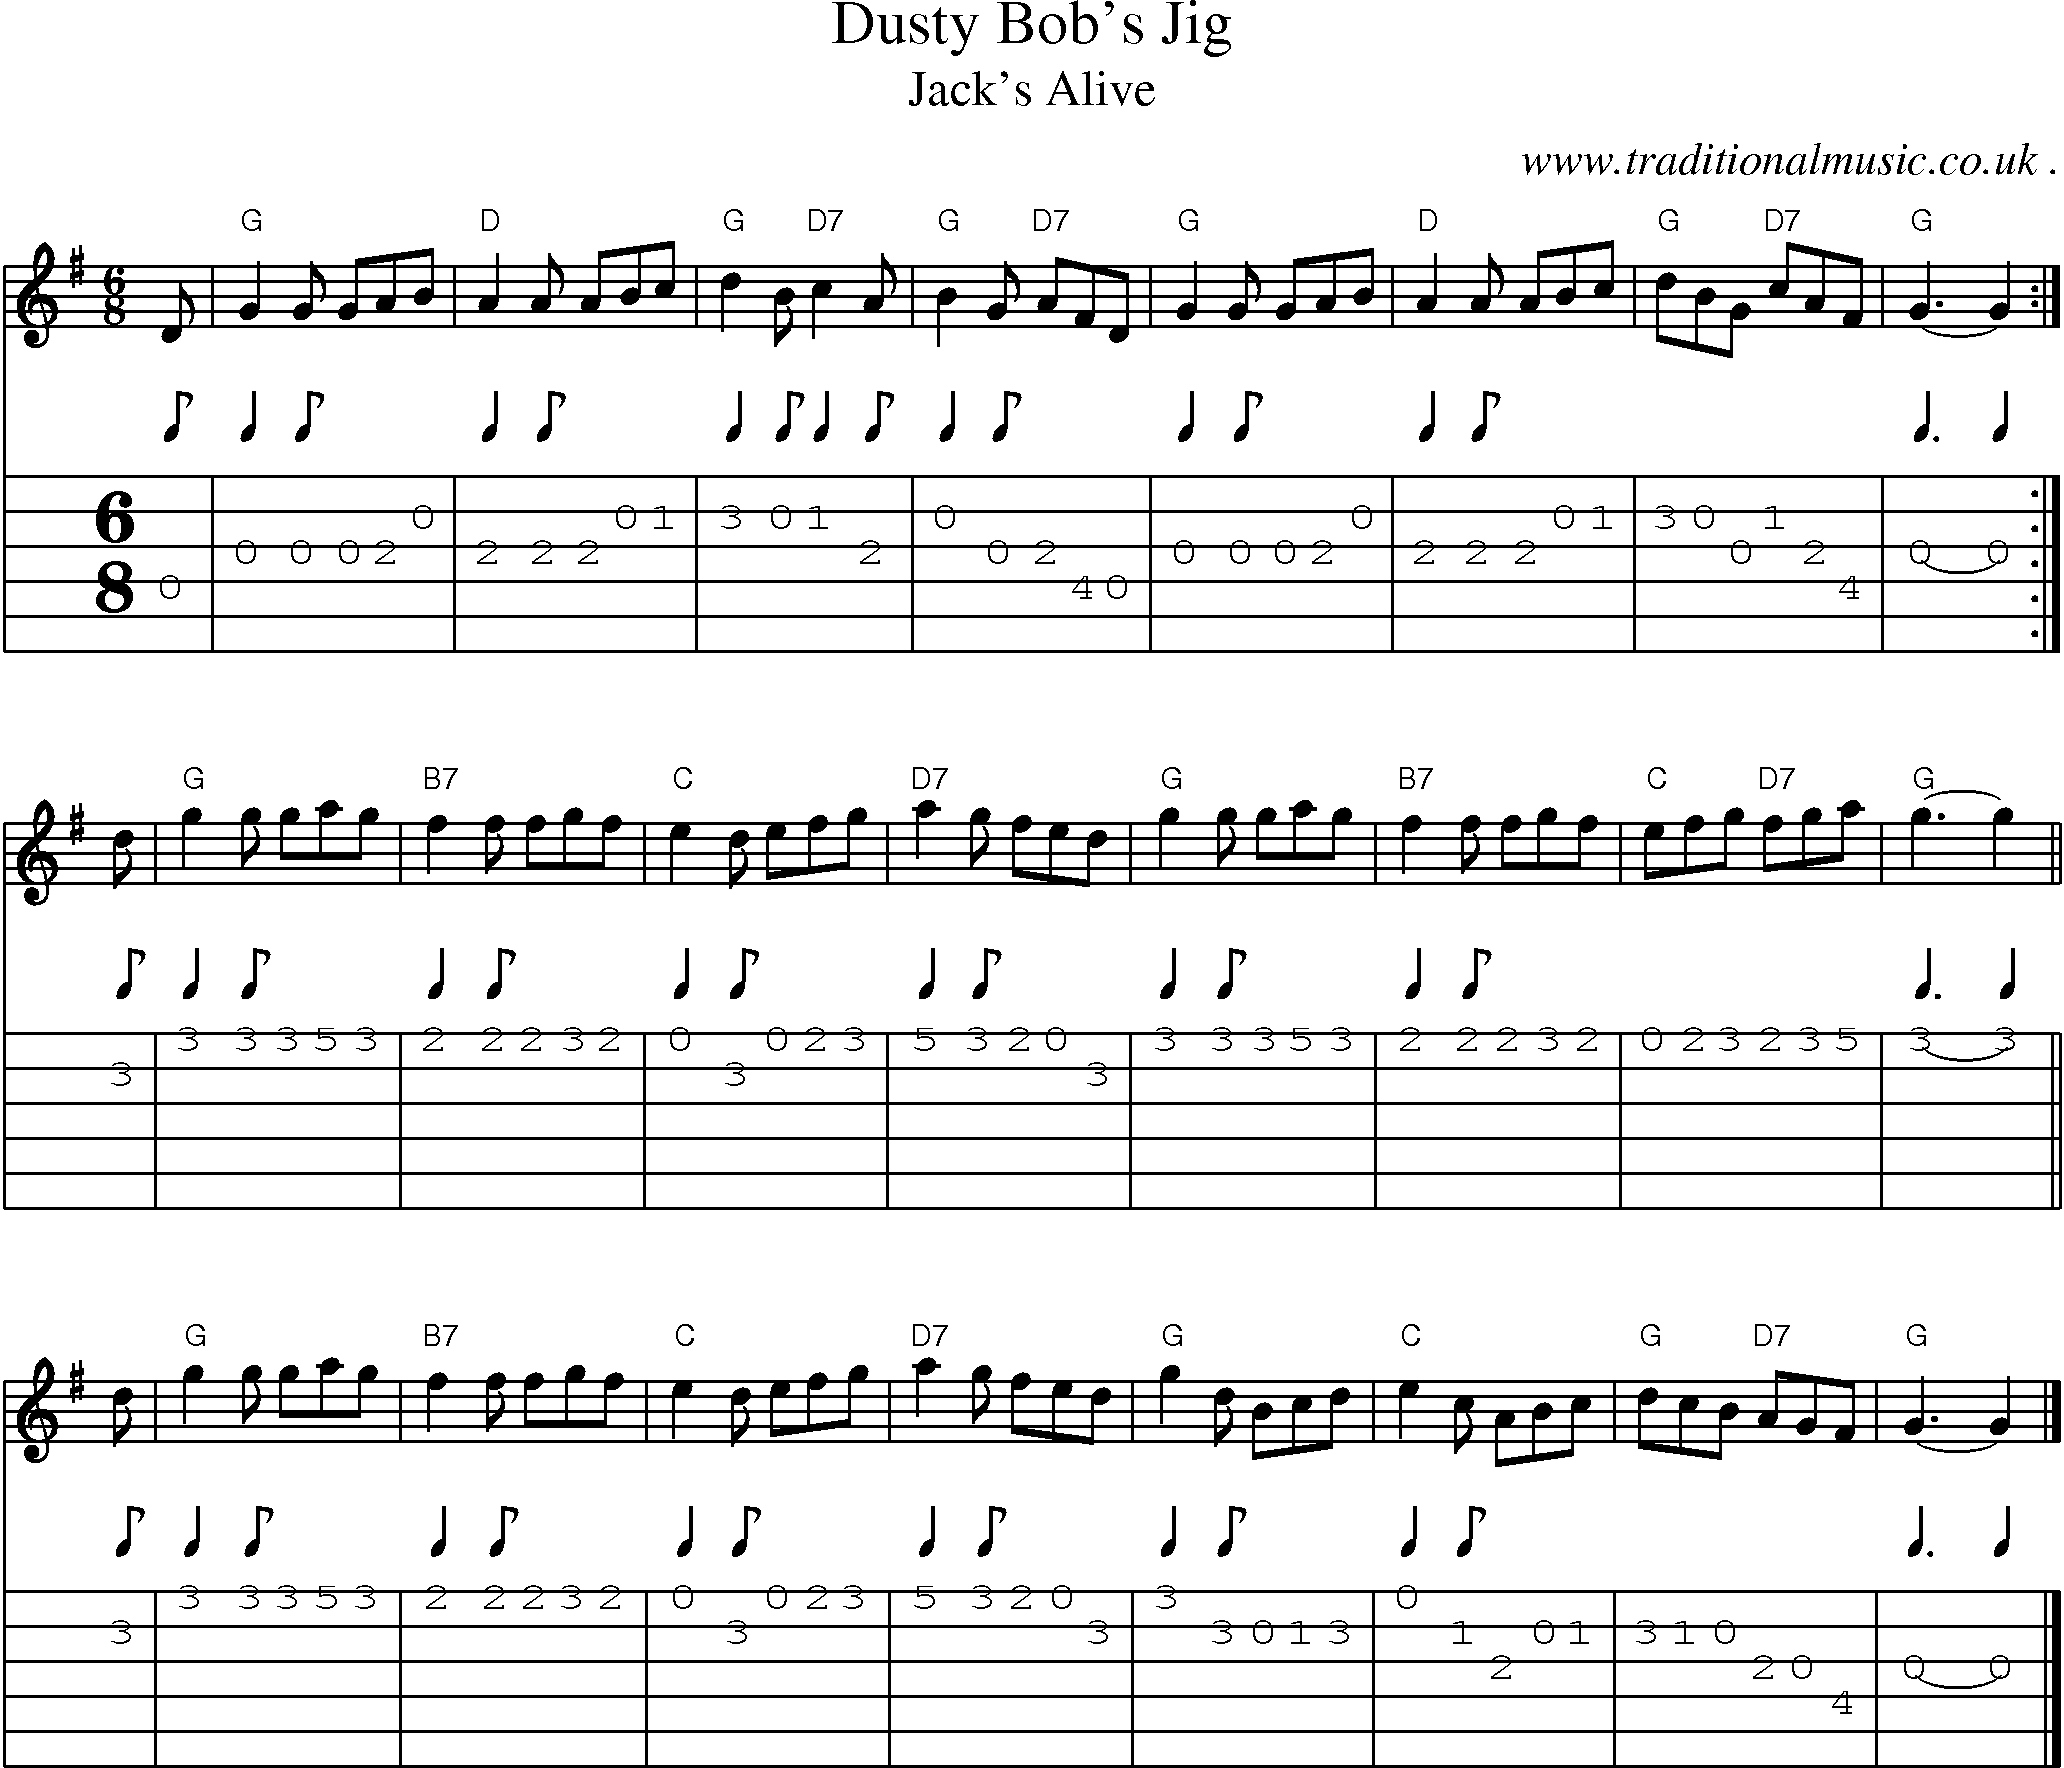 Sheet-music  score, Chords and Guitar Tabs for Dusty Bobs Jig